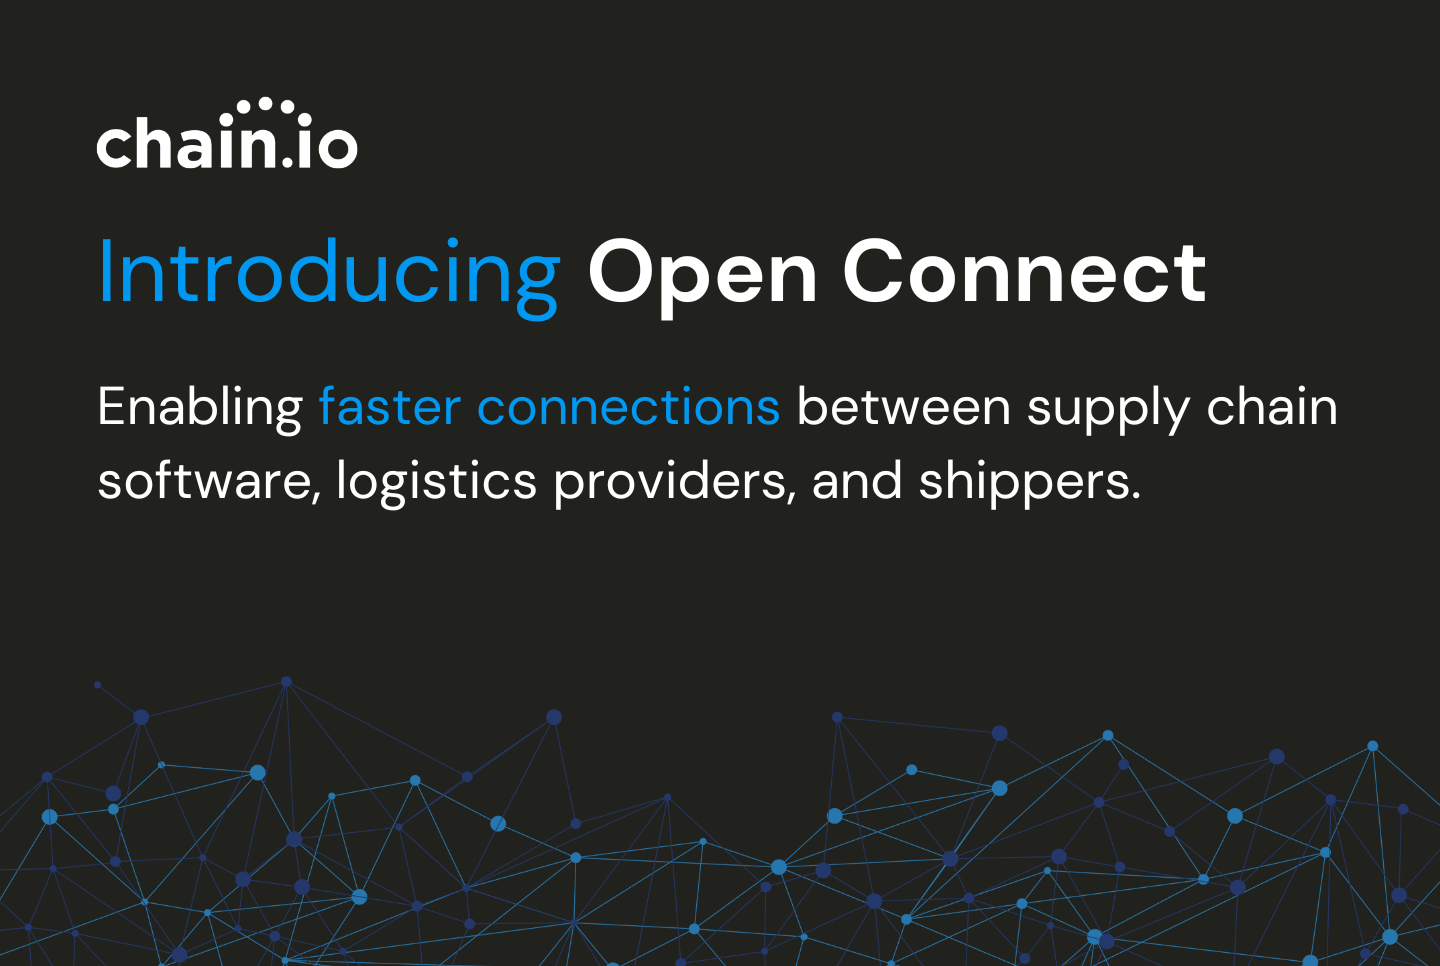 Introducing Open Connect from Chain.io, which enables API connections between software providers and logistics organizations for better data transparency.